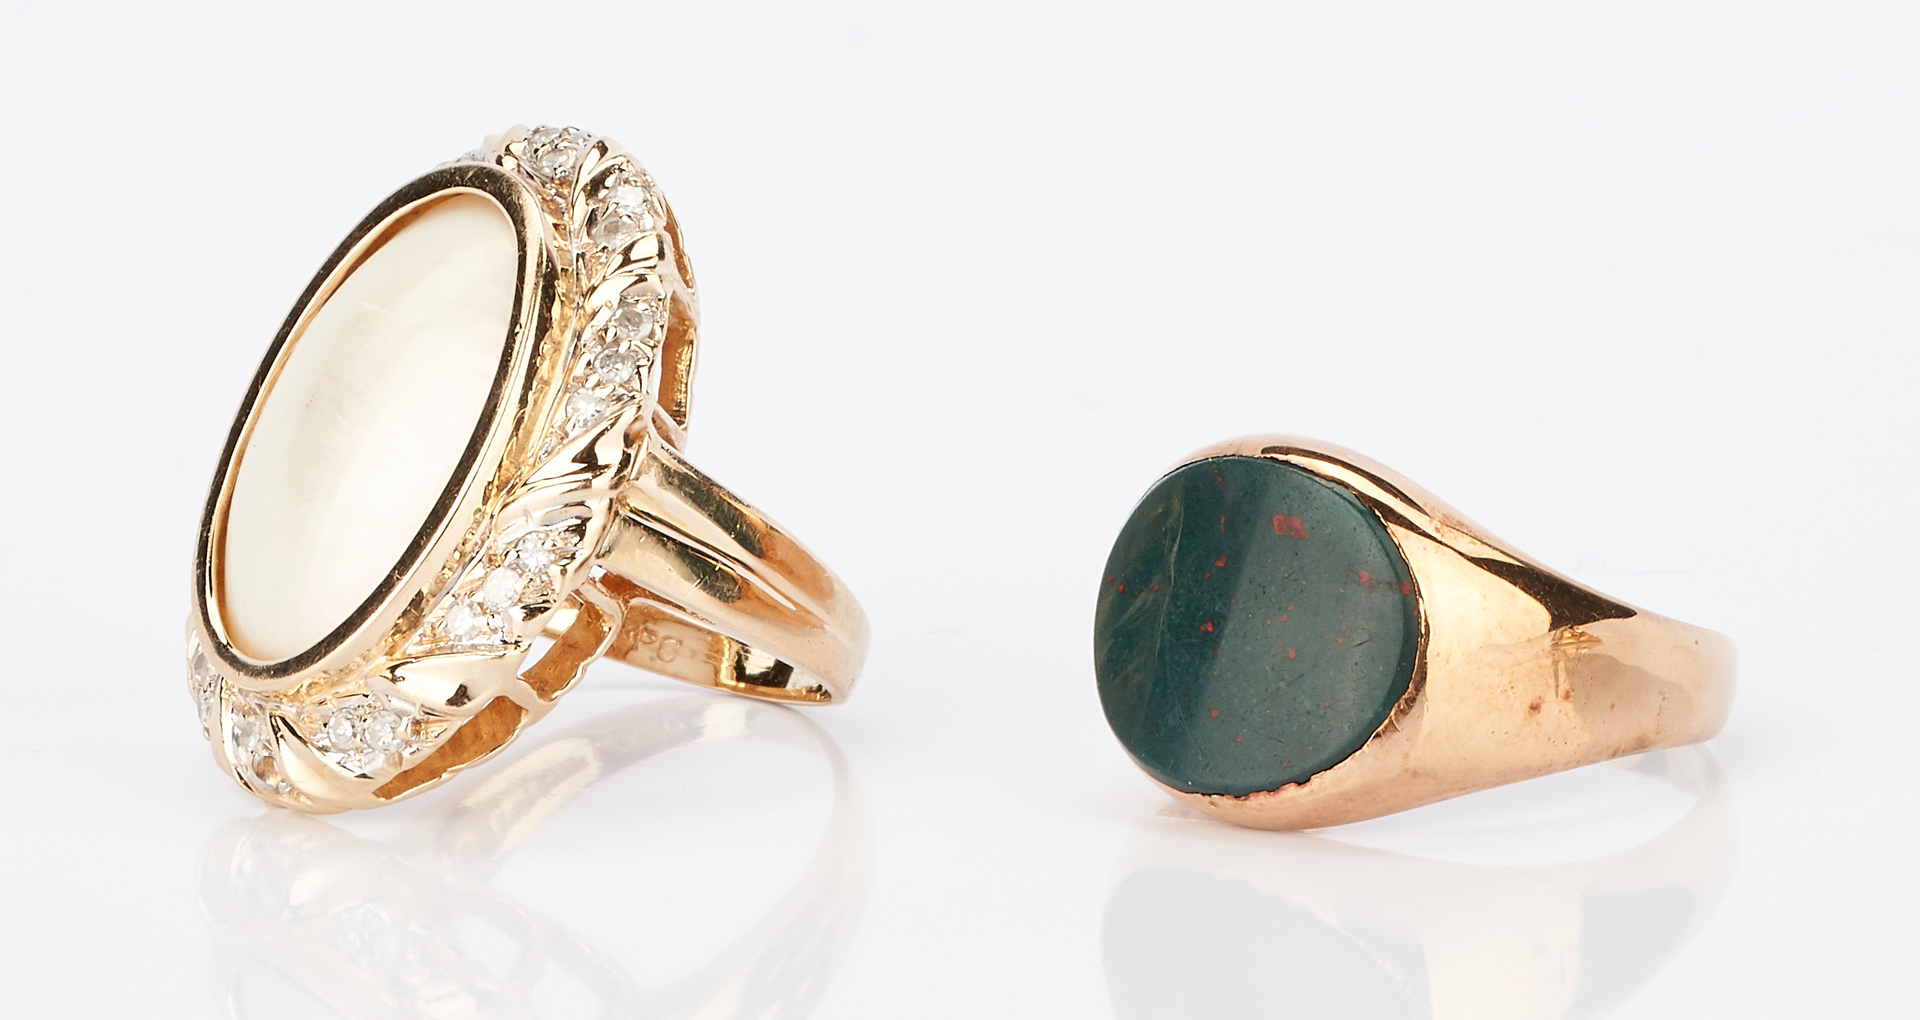 Lot 1006: 5 Ladies Gold and Gemstone Rings